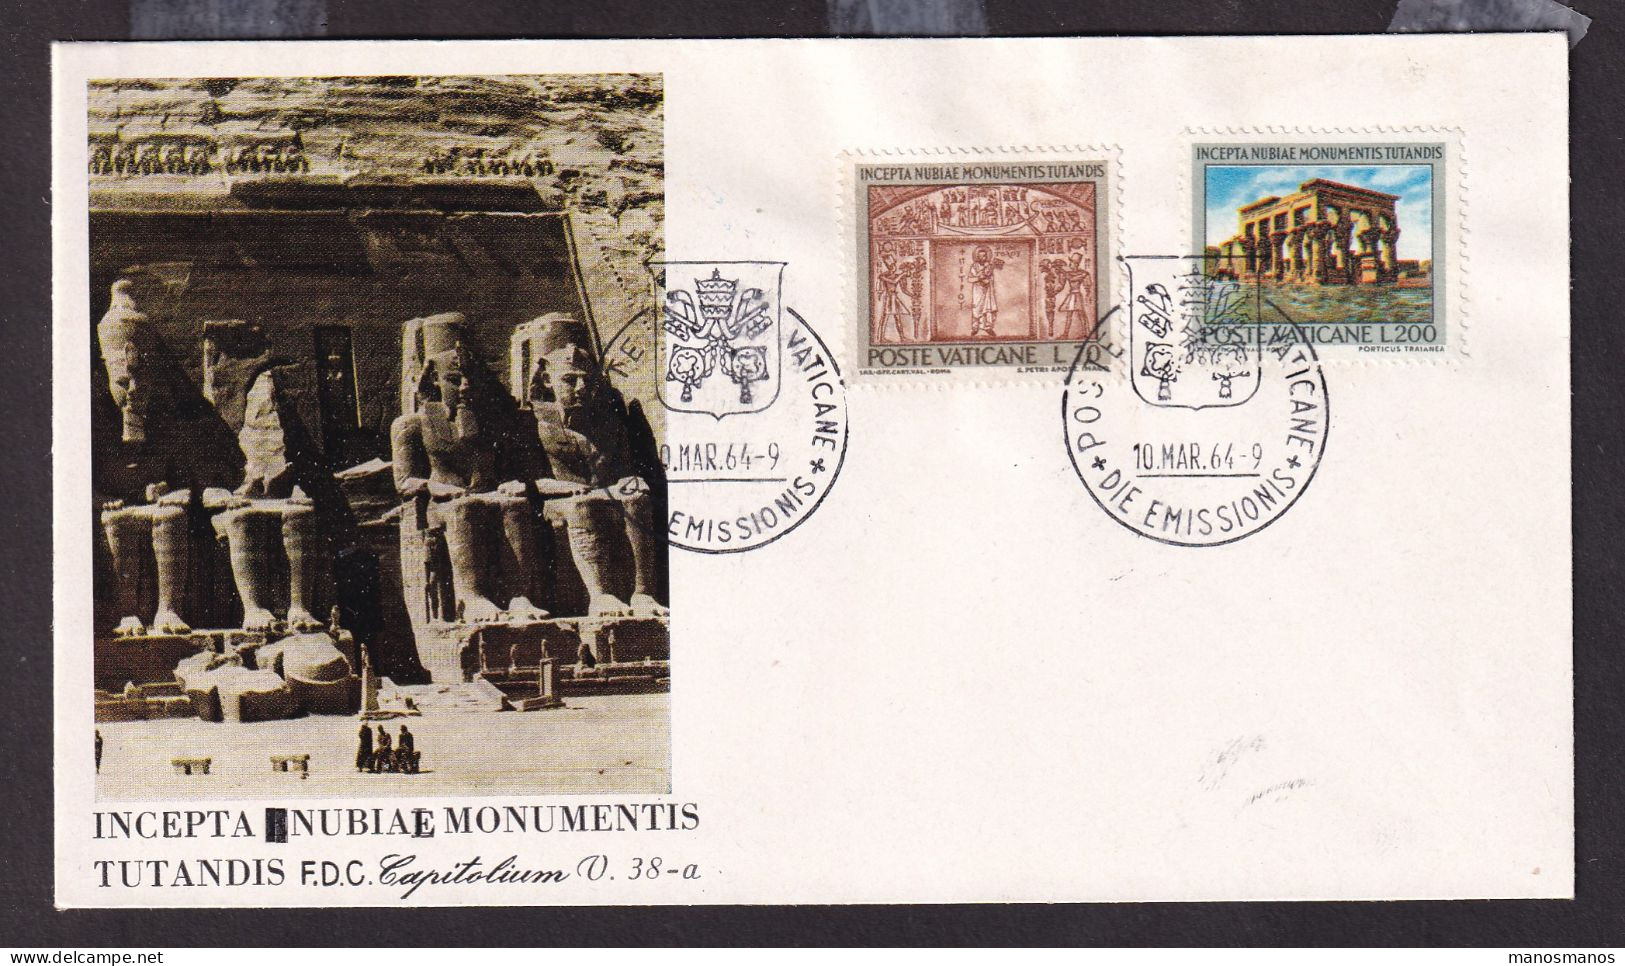 362/31 - EGYPTOLOGY - SAVE THE MONUMENTS OF NUBIA CAMPAIGN - VATICAN F.D.C. 1964 - Archéologie